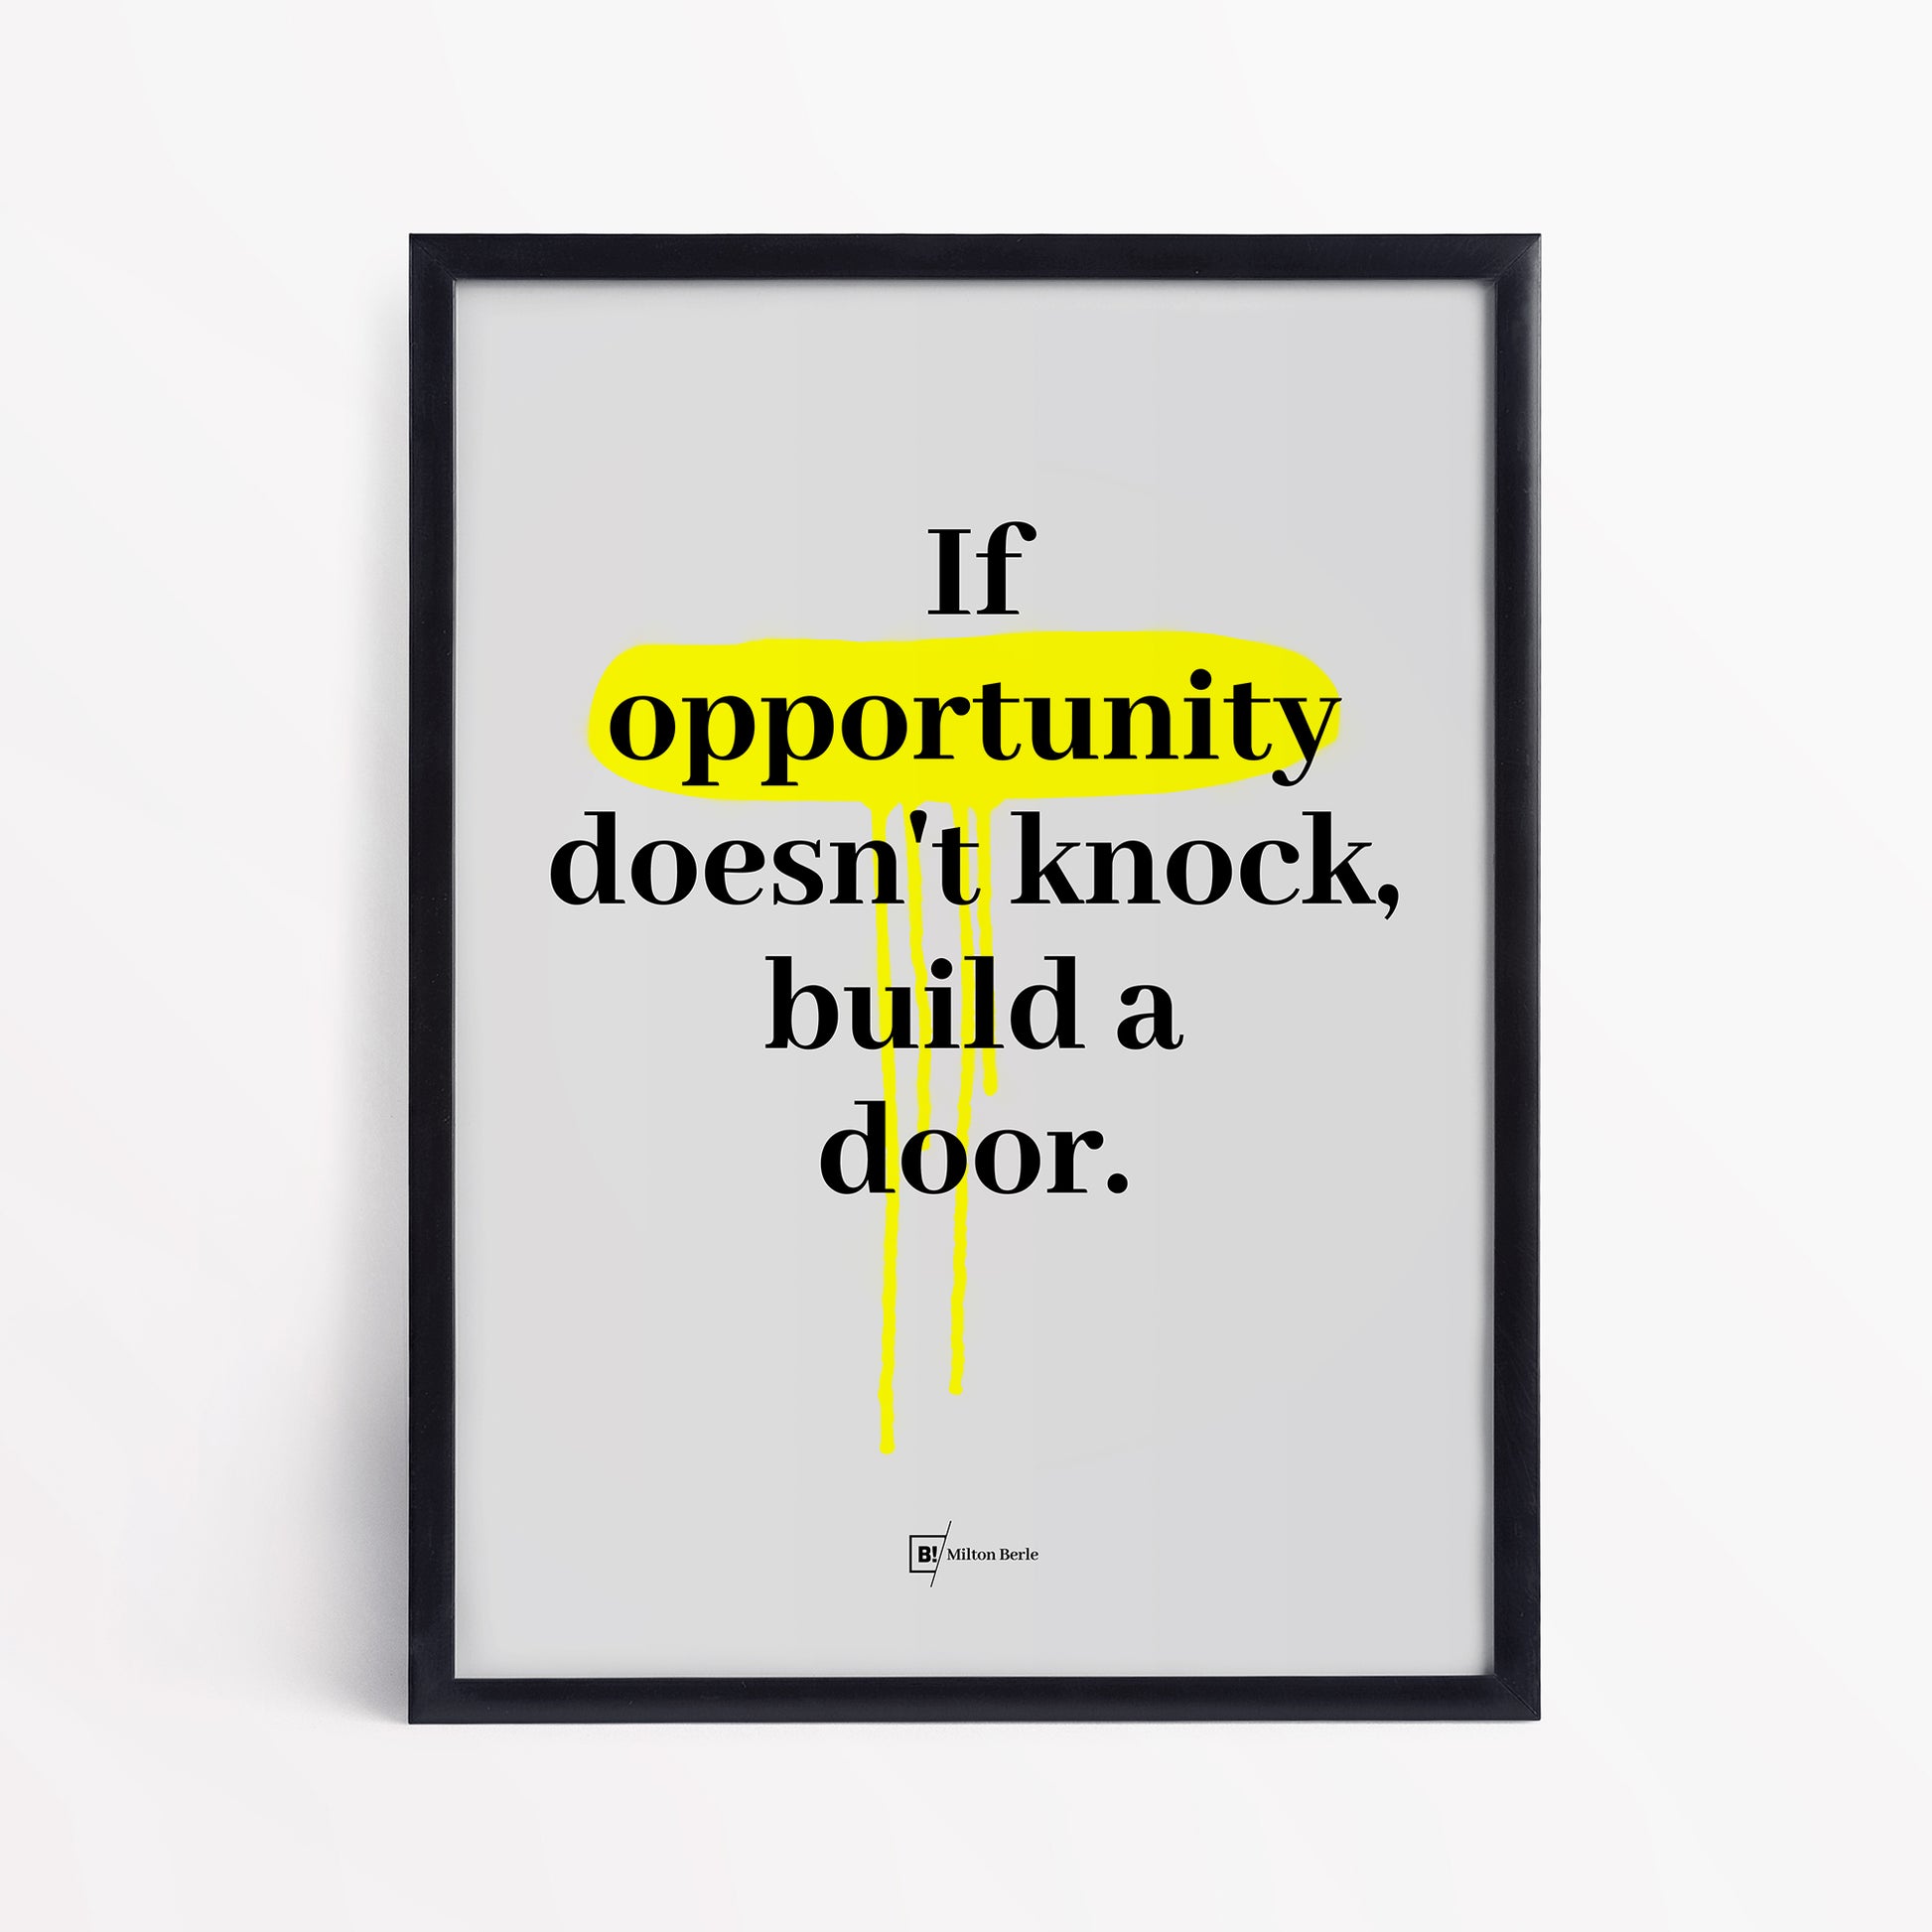 Be inspired by Milton Berle's famous "If opportunity doesn't knock, build a door" quote art print. This artwork was printed using the giclée process on archival acid-free paper and is presented in a simple black frame that captures its timeless beauty in every detail.